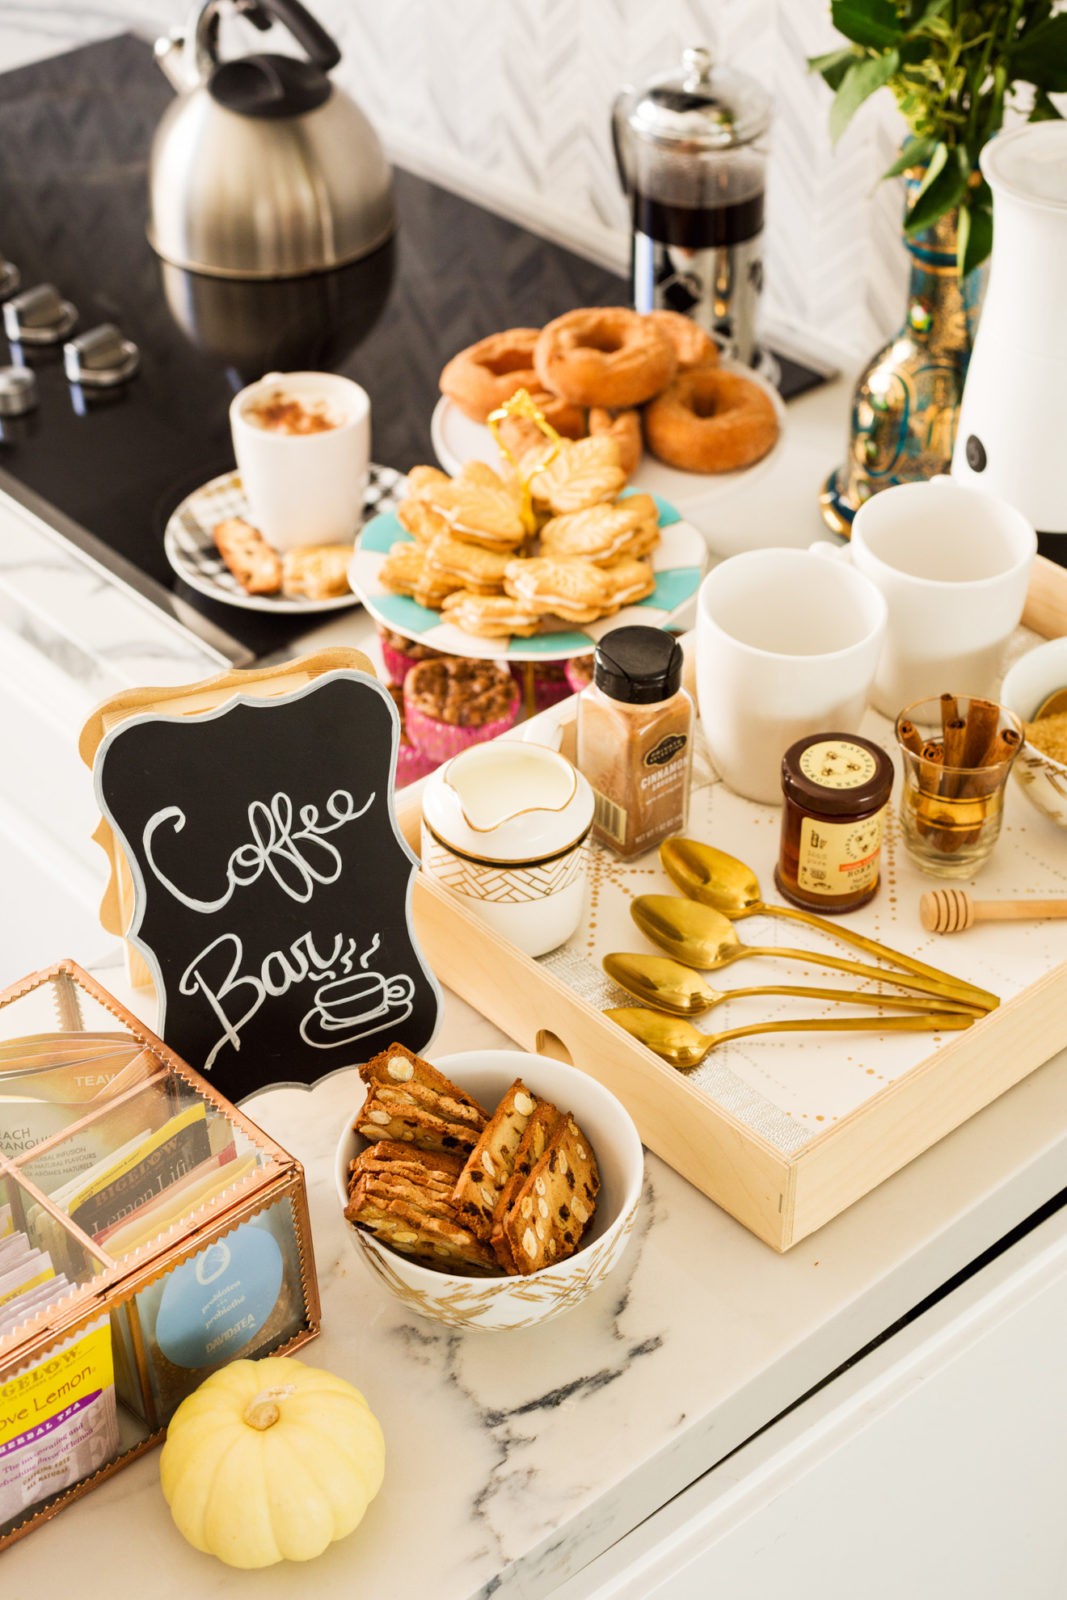 Festive Coffee Bar ideas by Popular Lifestyle Blogger Laura Lily | Dinner Party Essentials: Hosting Tips, Table Settings Ideas and Bar Cart Inspiration by popular Los Angeles life and style blogger, Laura Lily: image of a coffee bar with cookies, biscotti, donuts, coffee mugs, and coffee packets. 